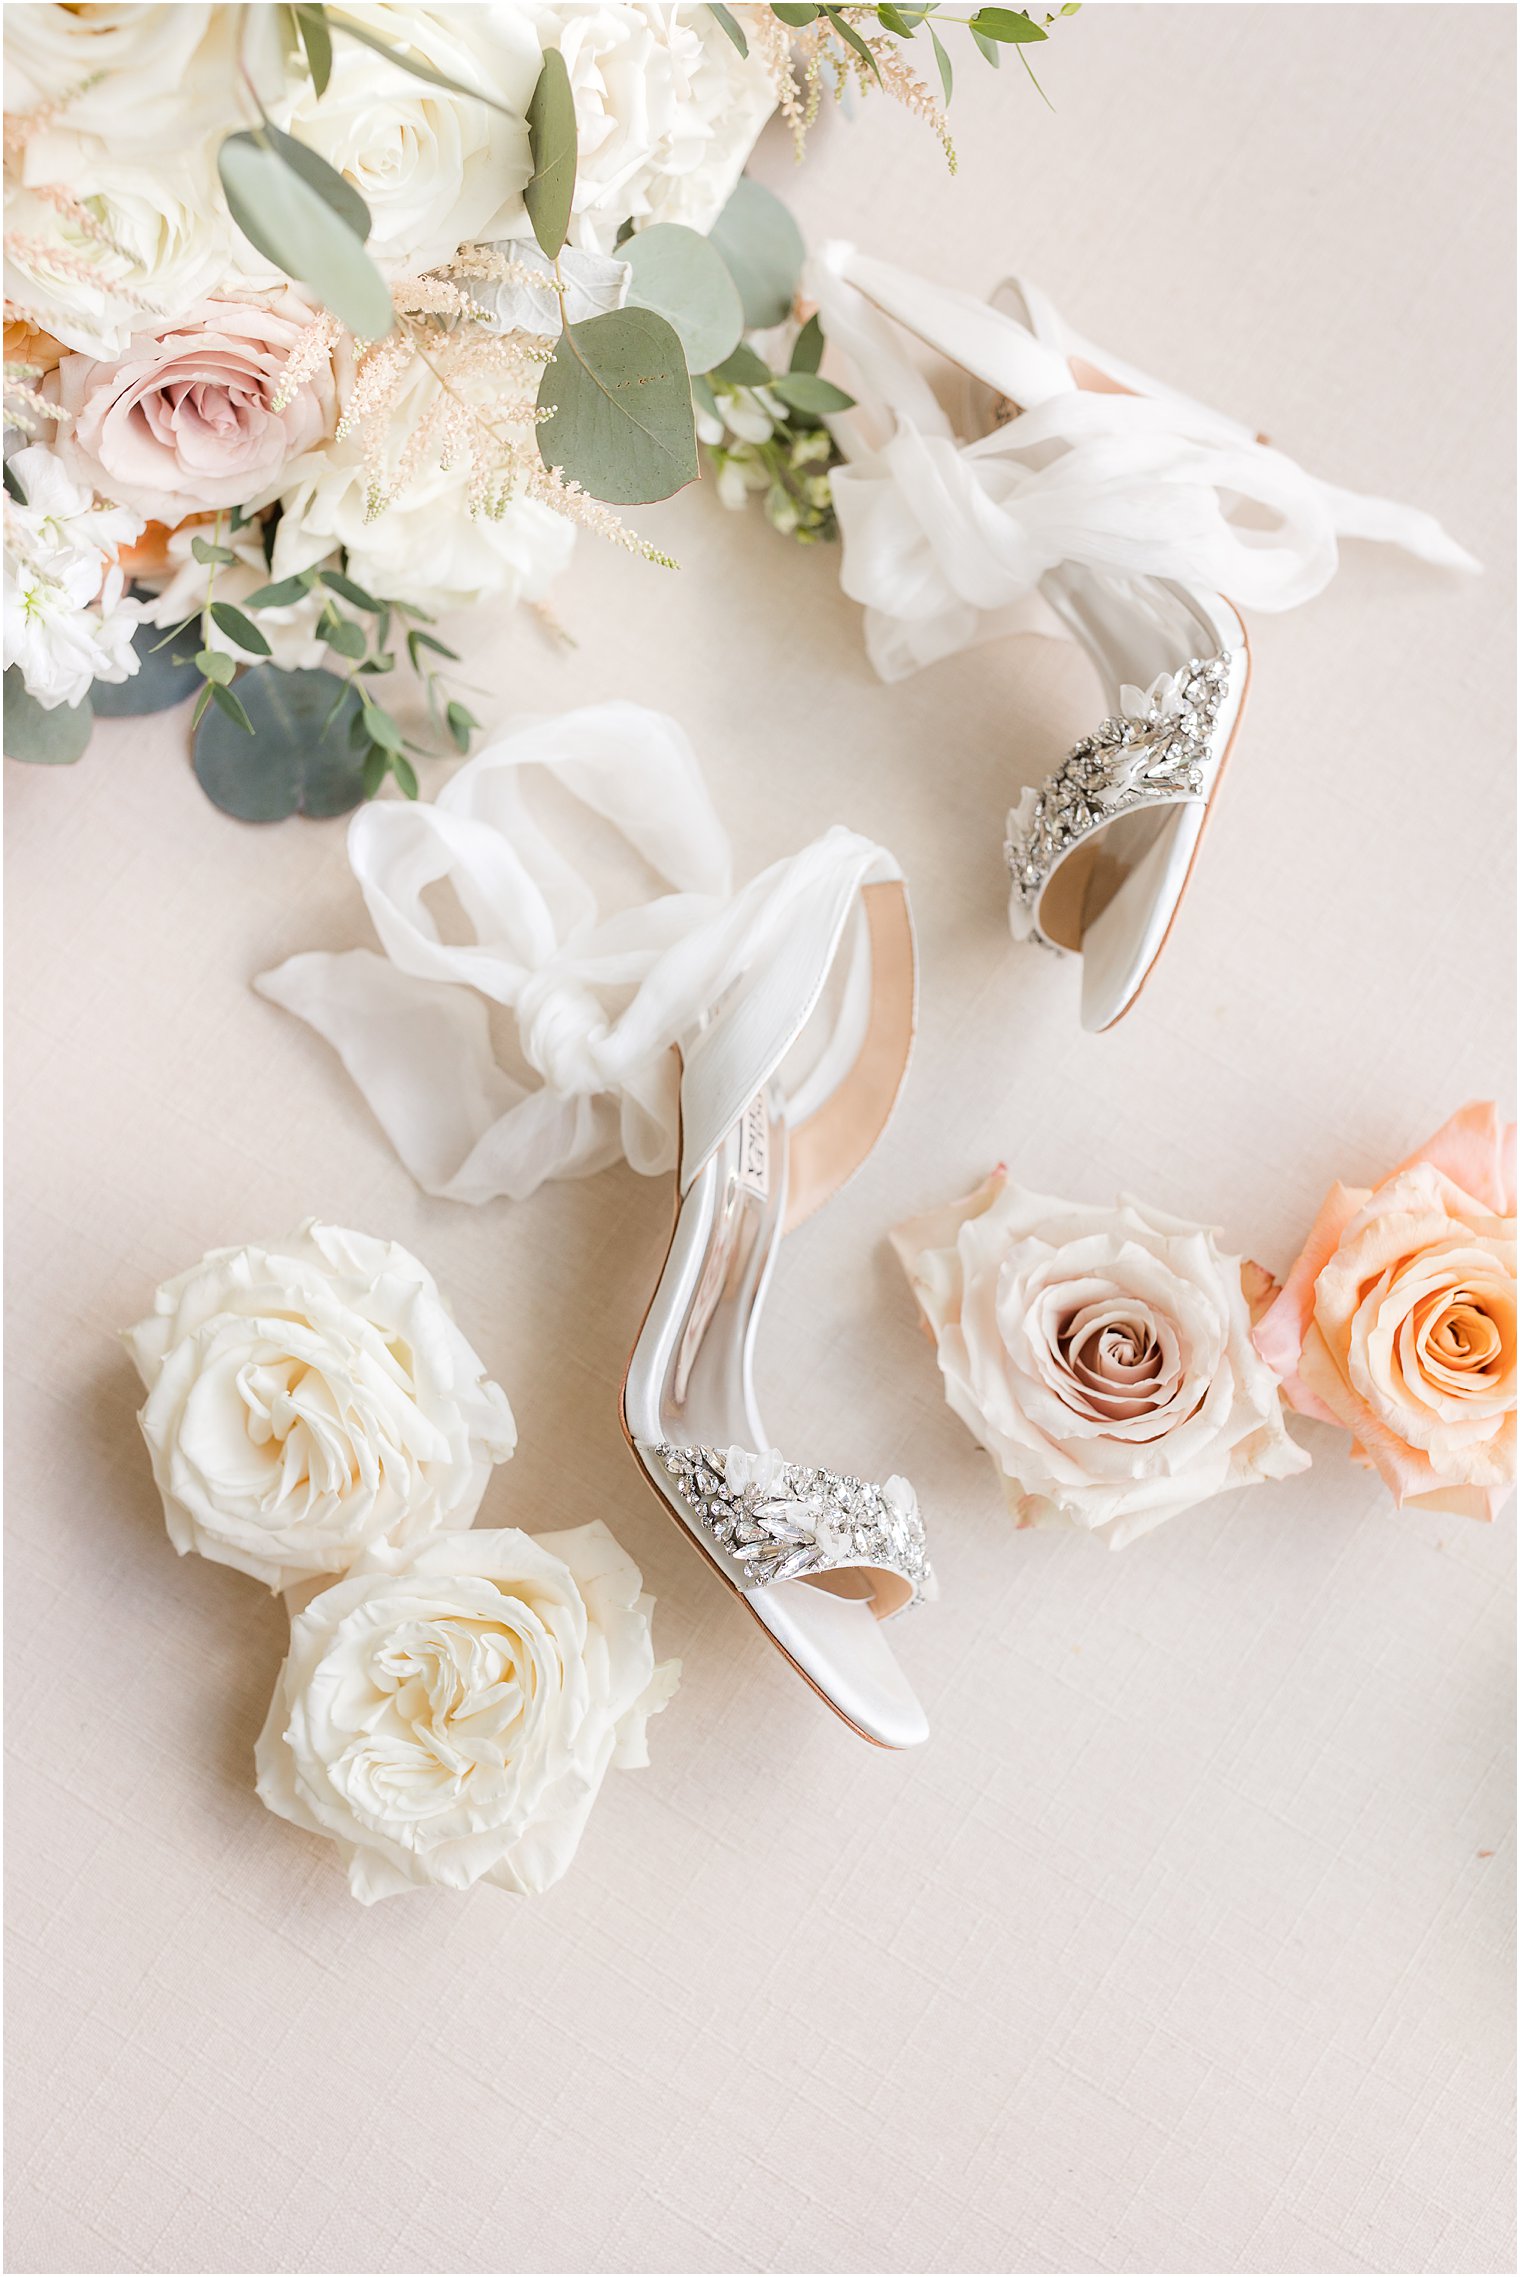 bride's shoes lay with pink and peach roses